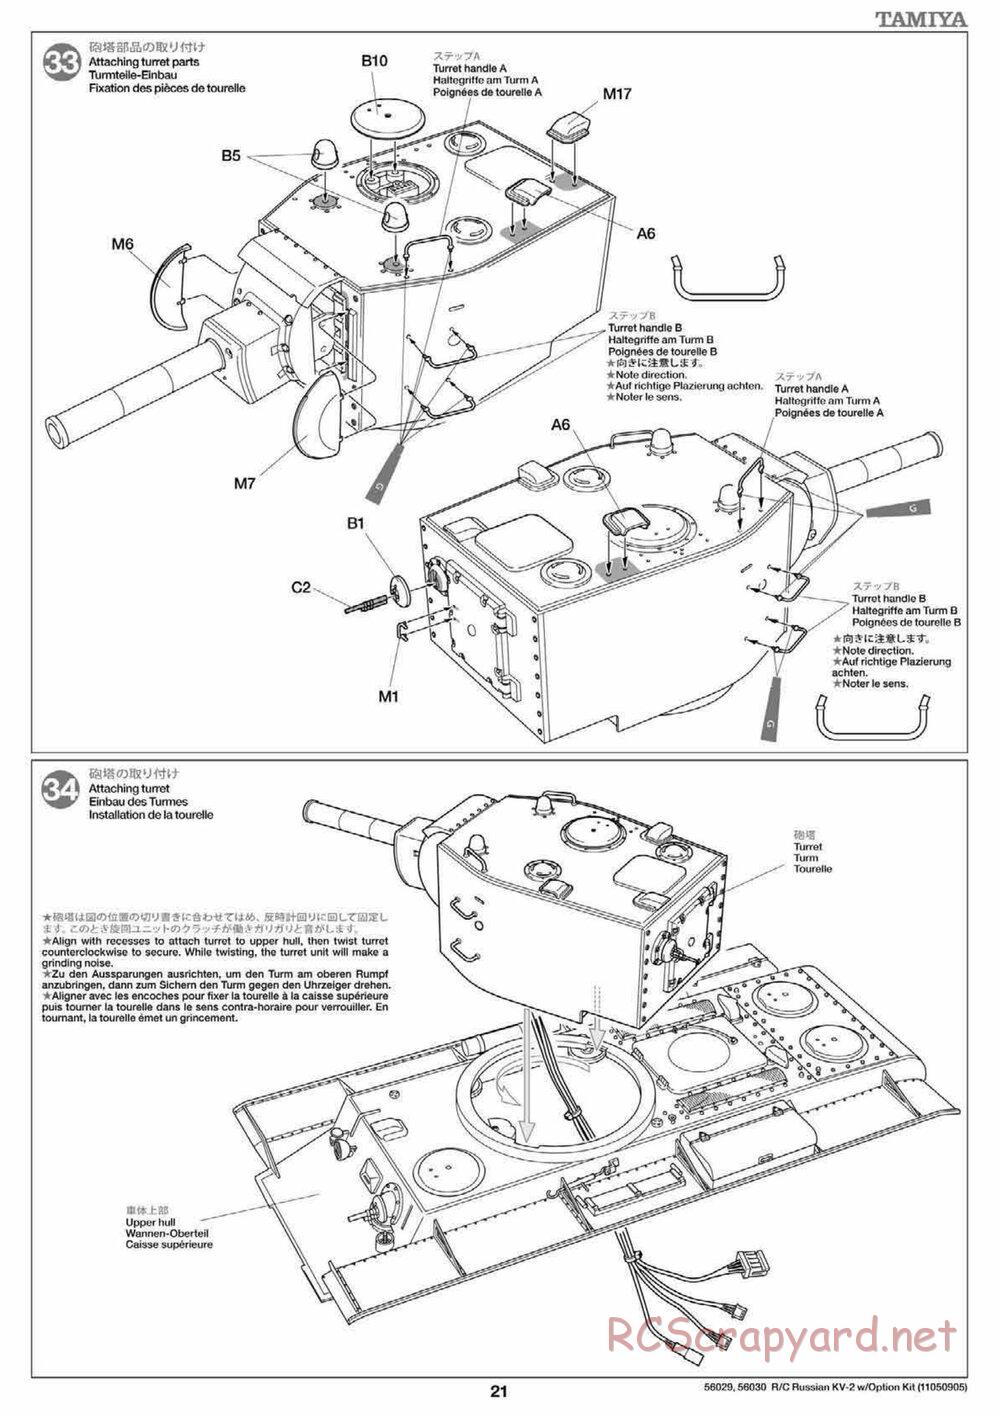 Tamiya - Russian Heavy Tank KV-2 Gigant - 1/16 Scale Chassis - Manual - Page 21